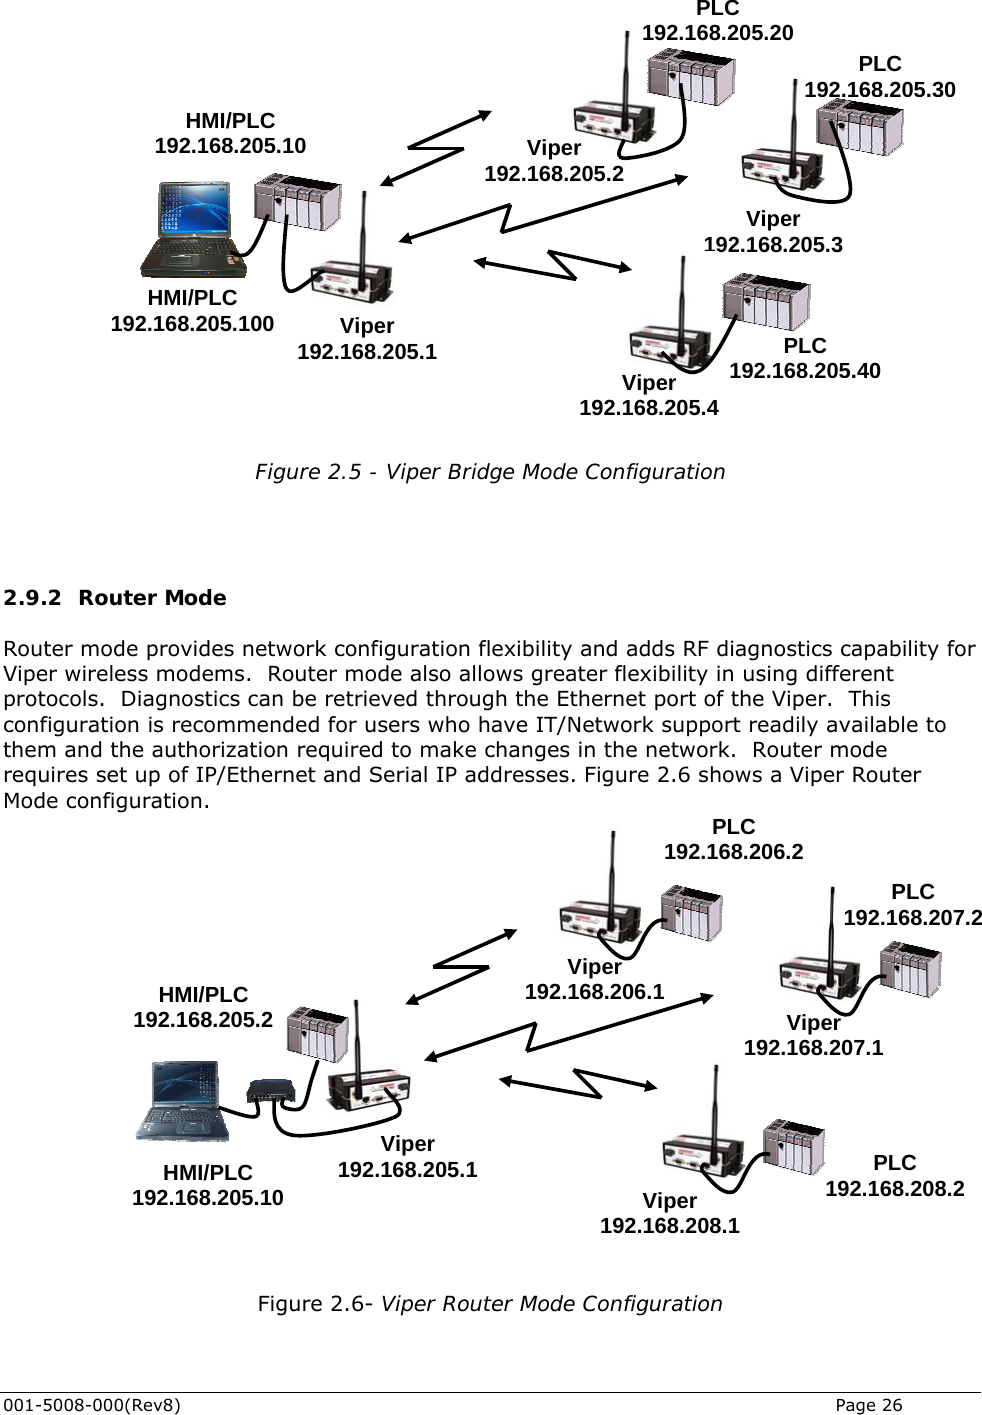    001-5008-000(Rev8)   Page 26                  Figure 2.5 - Viper Bridge Mode Configuration    2.9.2 Router Mode Router mode provides network configuration flexibility and adds RF diagnostics capability for Viper wireless modems.  Router mode also allows greater flexibility in using different protocols.  Diagnostics can be retrieved through the Ethernet port of the Viper.  This configuration is recommended for users who have IT/Network support readily available to them and the authorization required to make changes in the network.  Router mode requires set up of IP/Ethernet and Serial IP addresses. Figure 2.6 shows a Viper Router Mode configuration.                    Figure 2.6- Viper Router Mode Configuration Viper 192.168.205.1 Viper 192.168.206.1 PLC 192.168.206.2 Viper 192.168.207.1 PLC 192.168.207.2 Viper 192.168.208.1 PLC 192.168.208.2 HMI/PLC 192.168.205.2 HMI/PLC 192.168.205.10 Viper 192.168.205.1Viper 192.168.205.3 PLC 192.168.205.40HMI/PLC 192.168.205.10HMI/PLC   PLC 192.168.205.100192.168.205.30PLC 192.168.205.20Viper 192.168.205.2Viper 192.168.205.4 